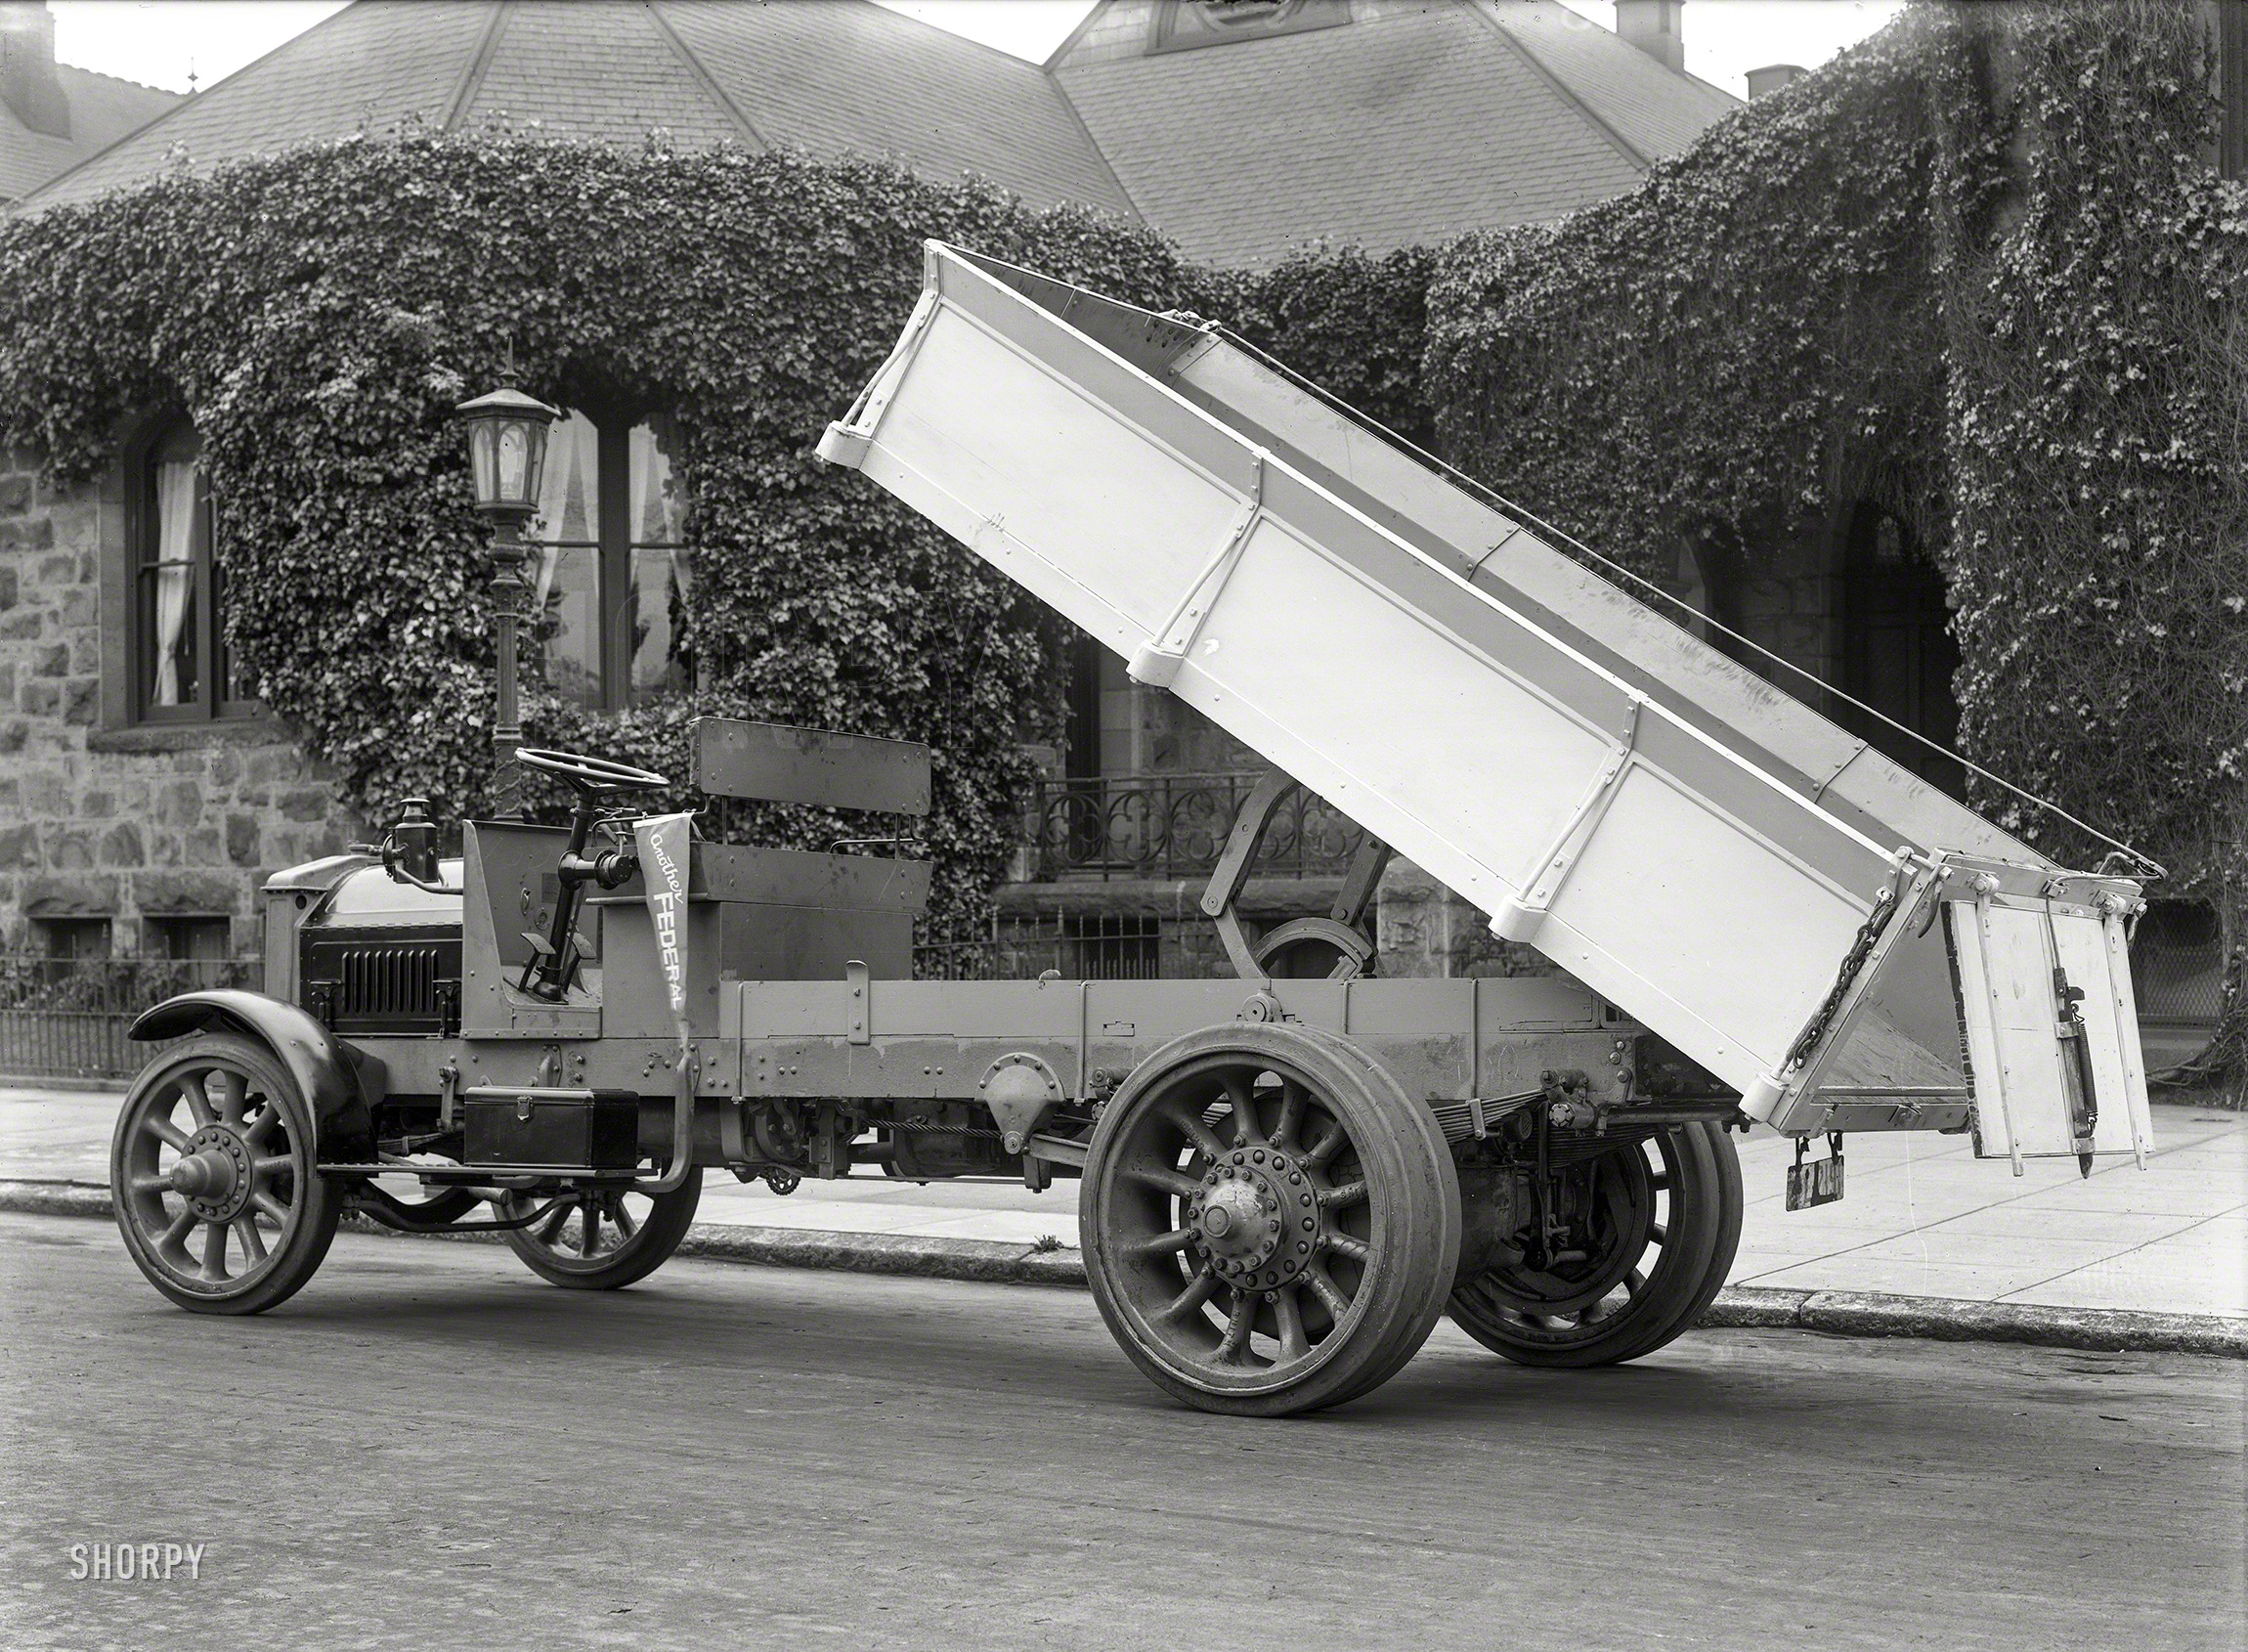 San Francisco, 1918. "Federal truck with dump body." Latest entry in the Shorpy Log of Leviathan Lorries. 5x7 glass negative by Christopher Helin. View full size.